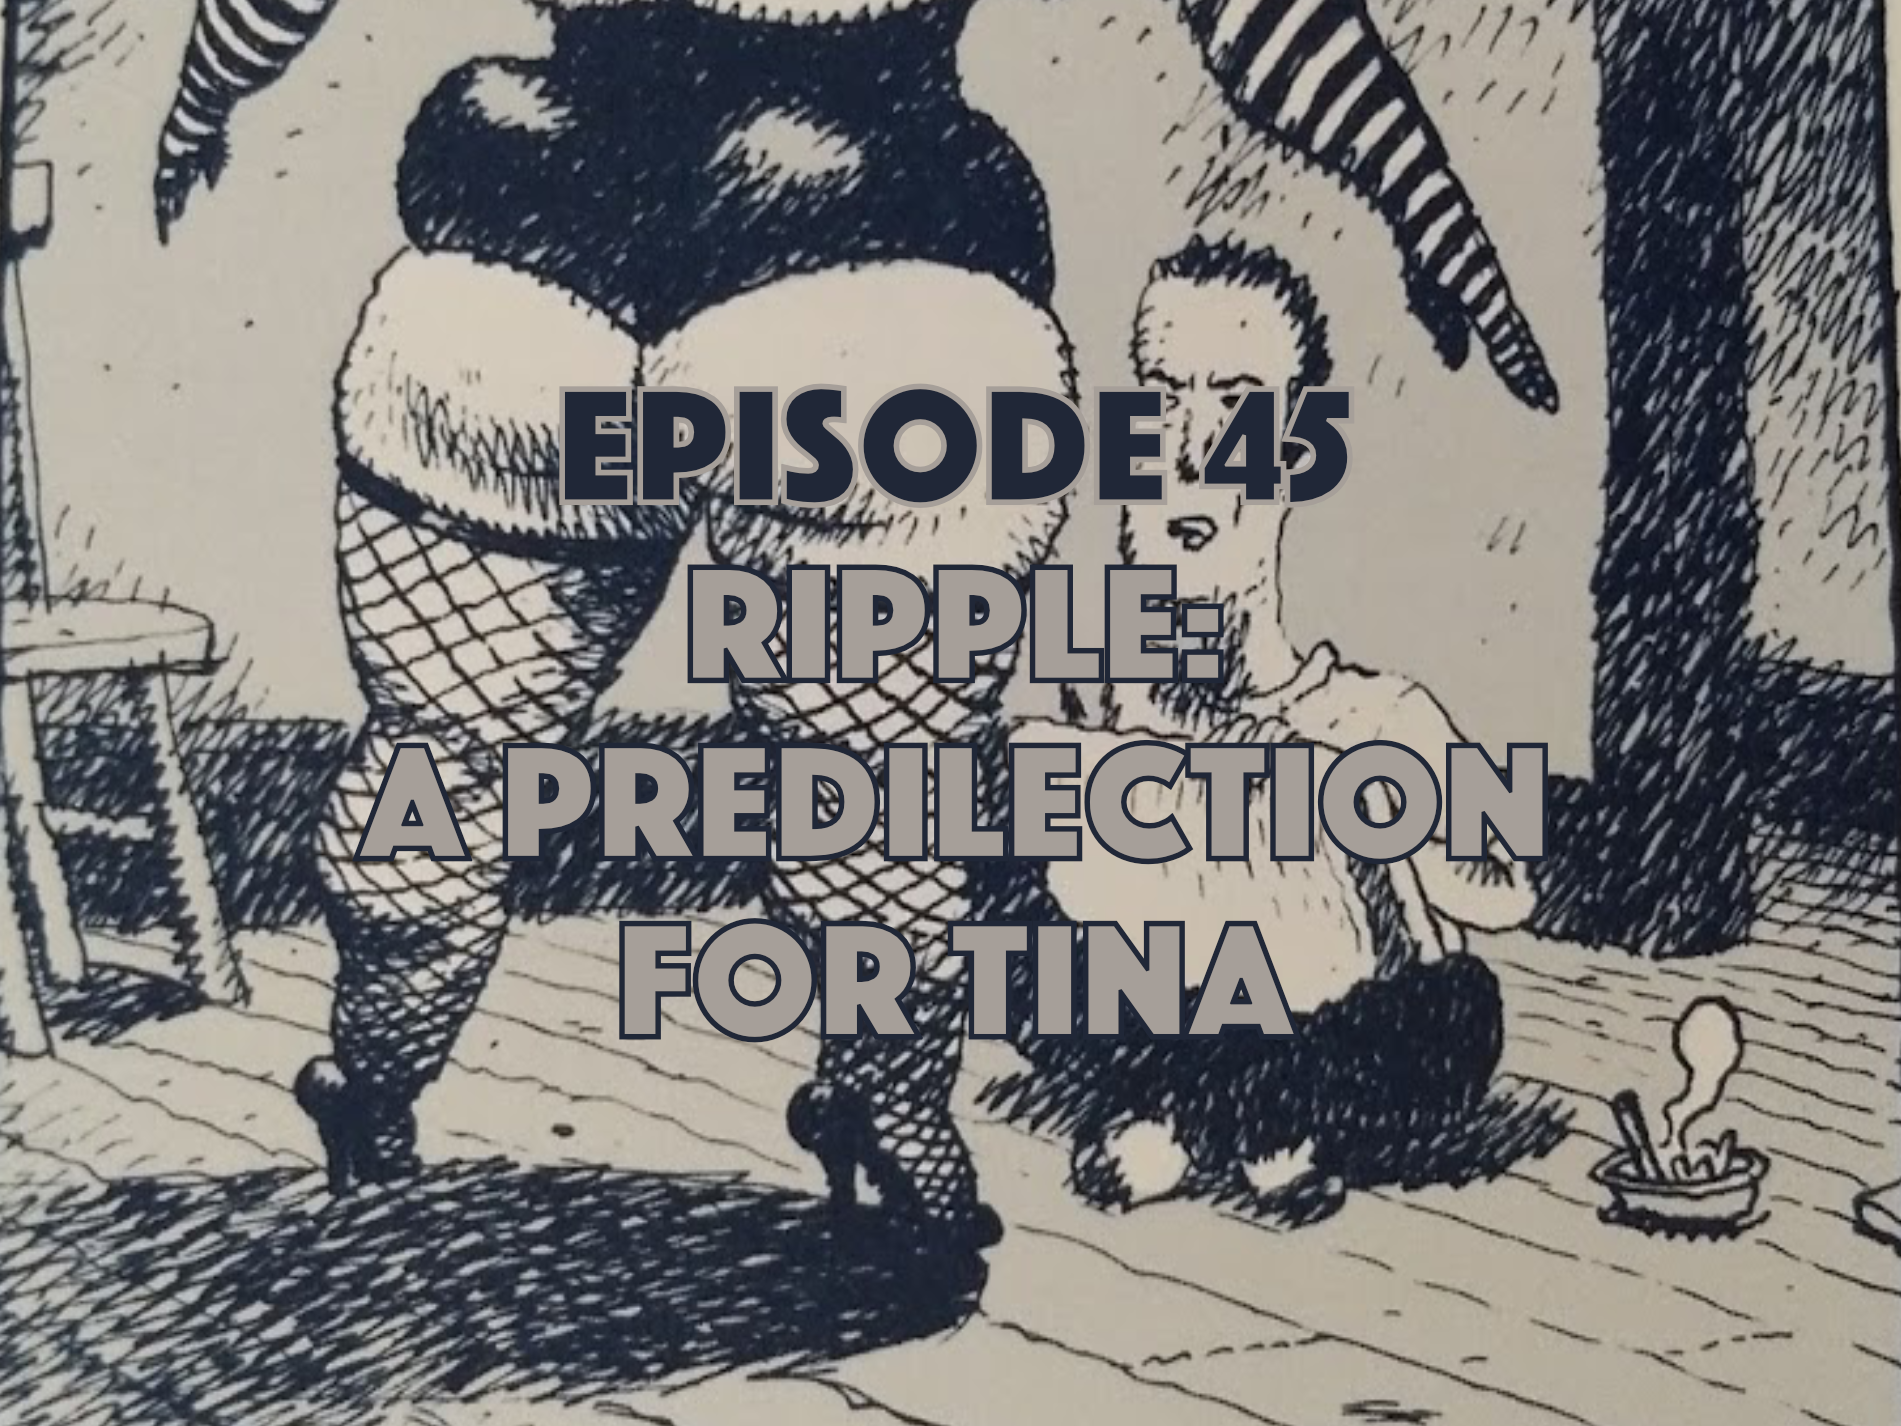 Episode 45 is Ripple: A Predilection for Tina